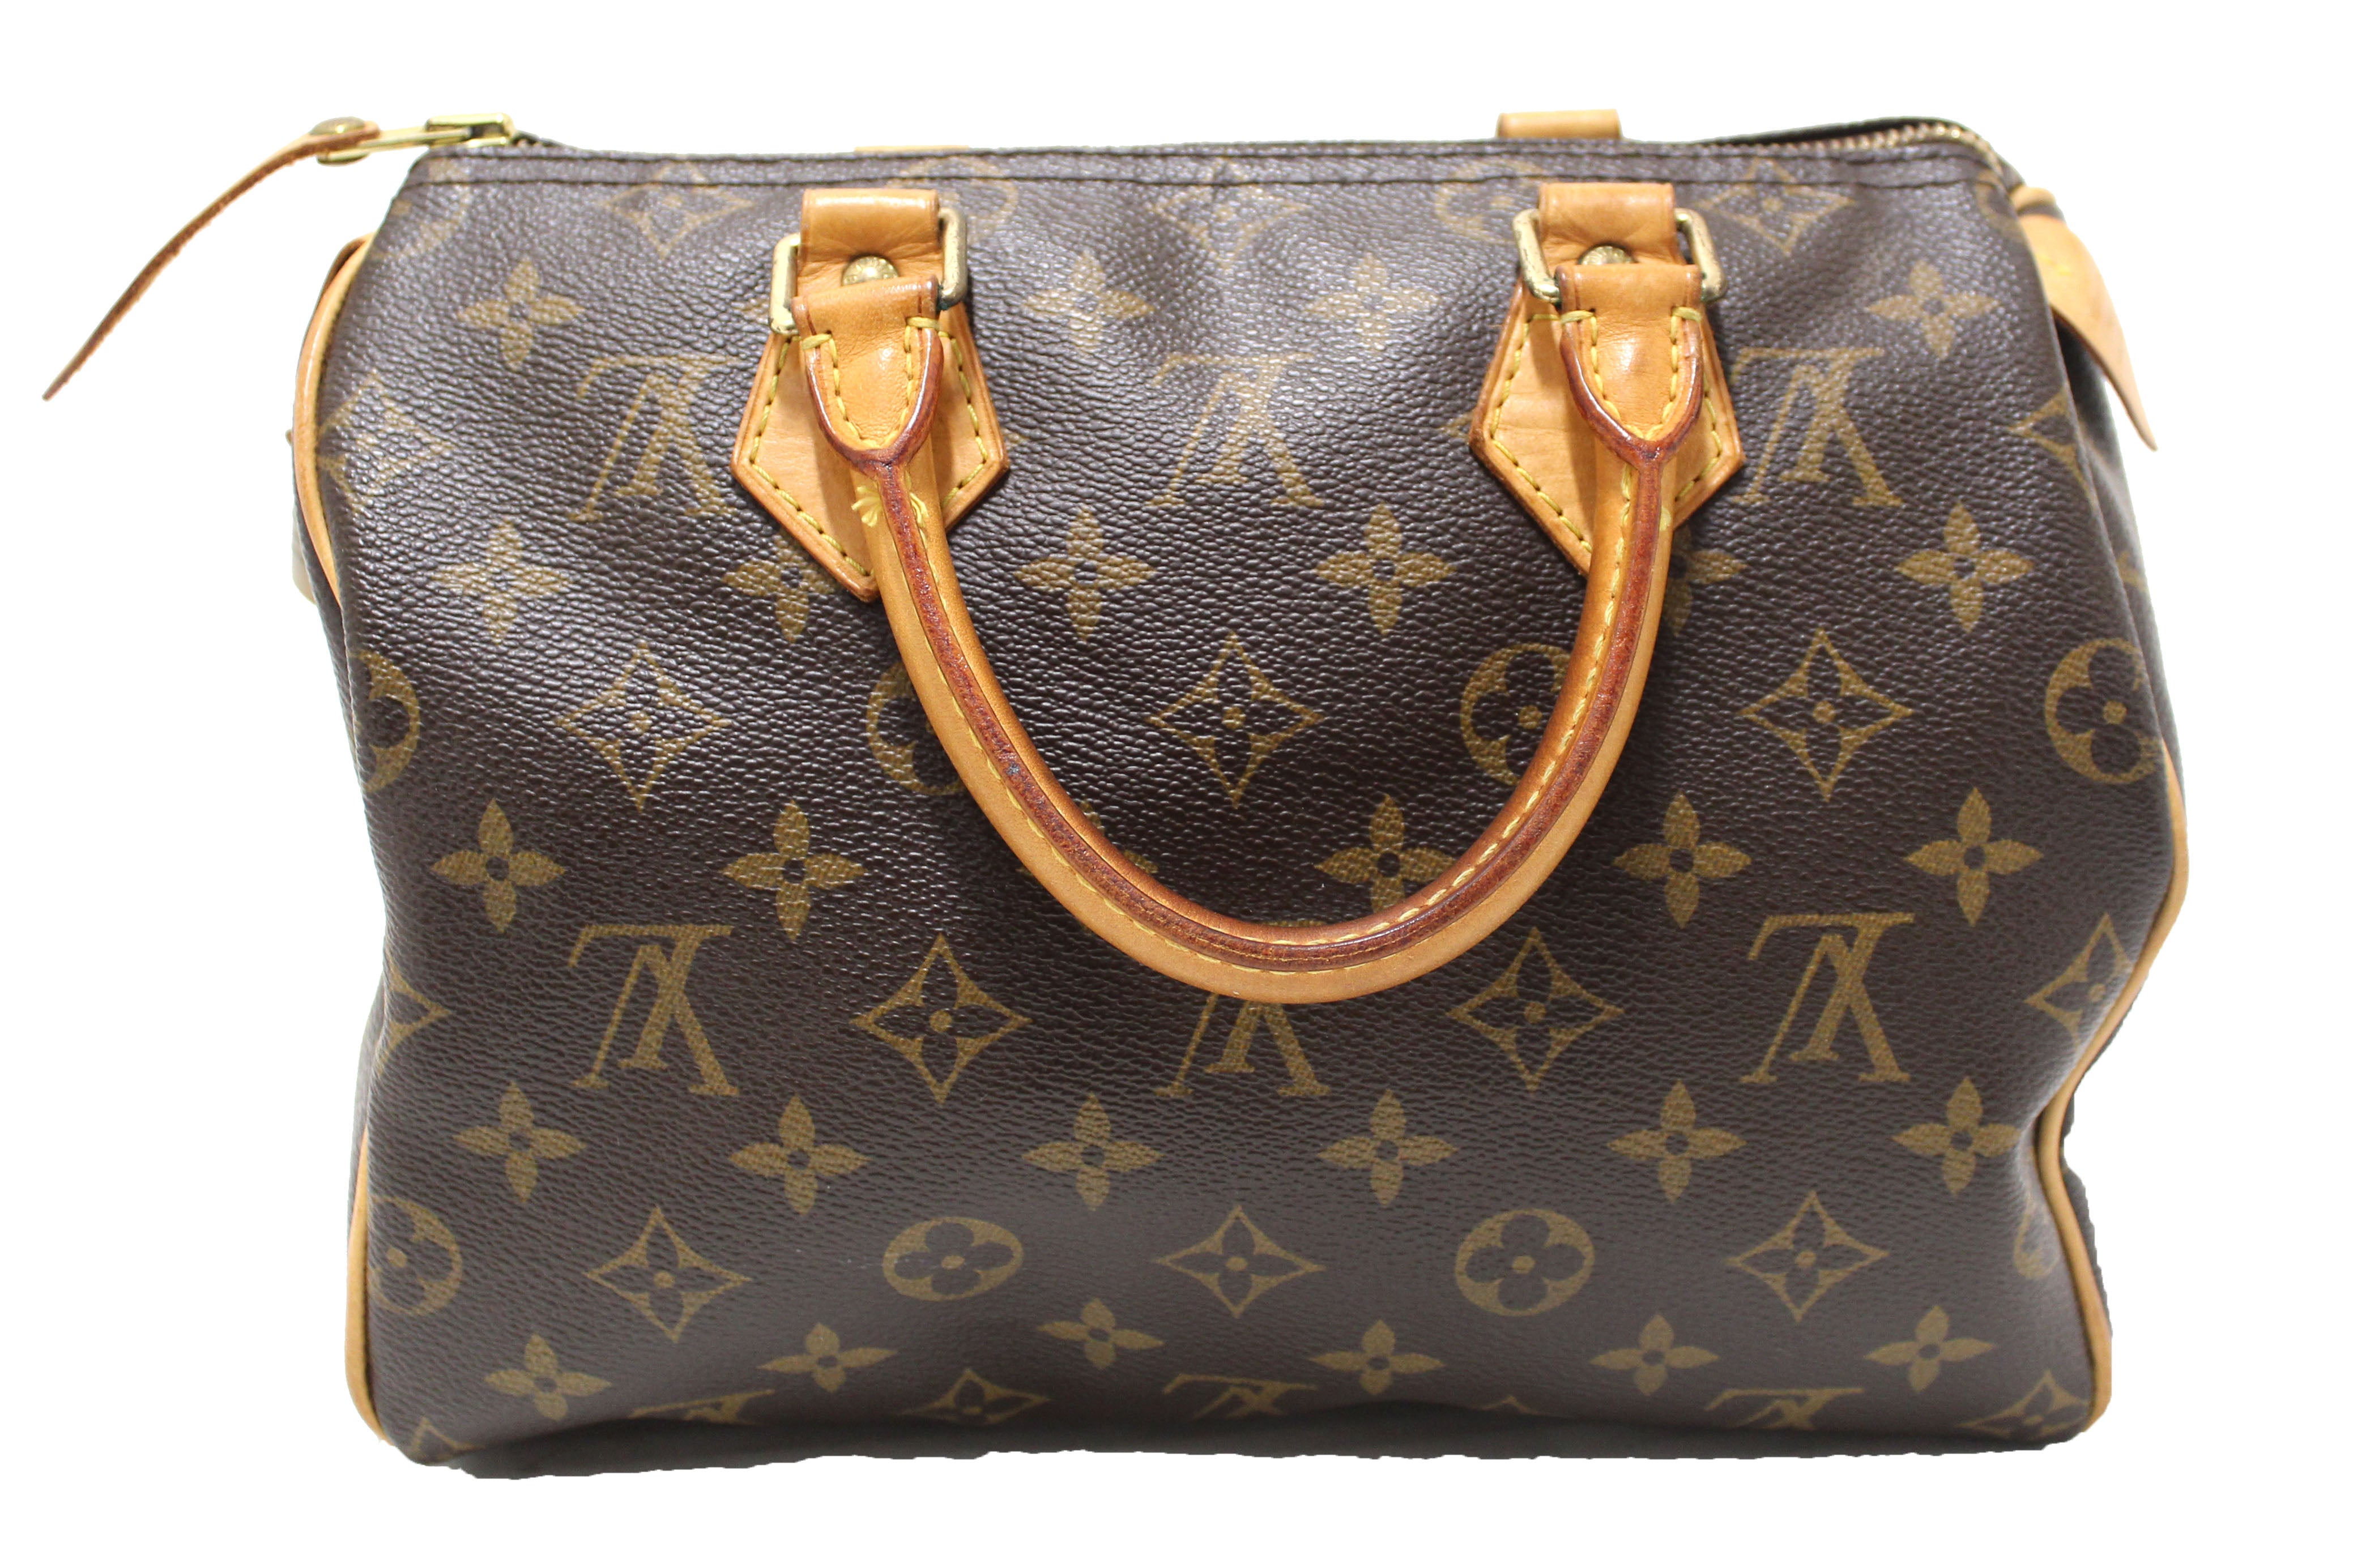 SOLD! SOLD! Authentic LV Speedy 25